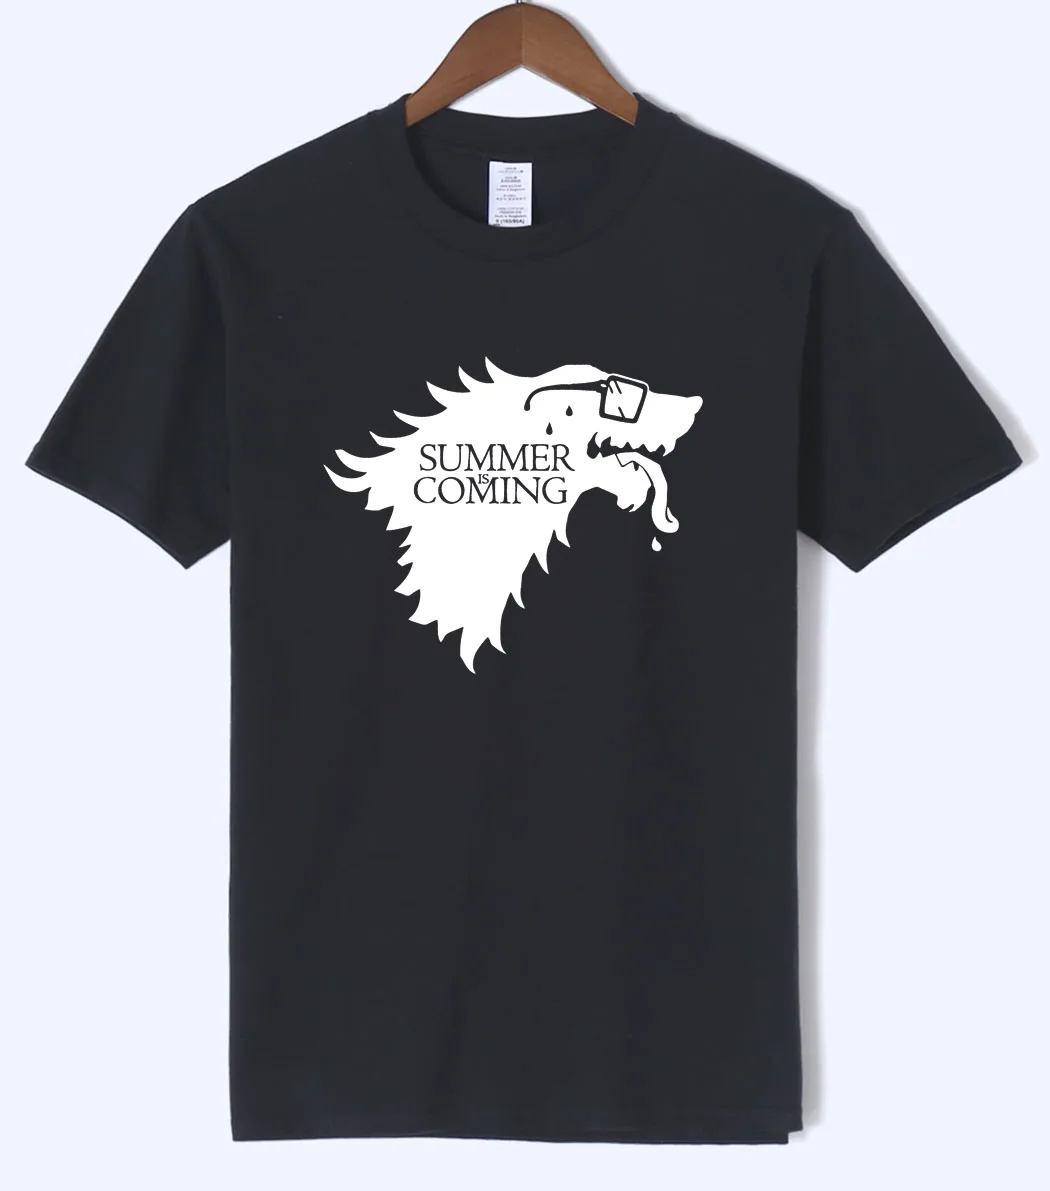 Shows game of thrones t shirt summer is coming smock japanese